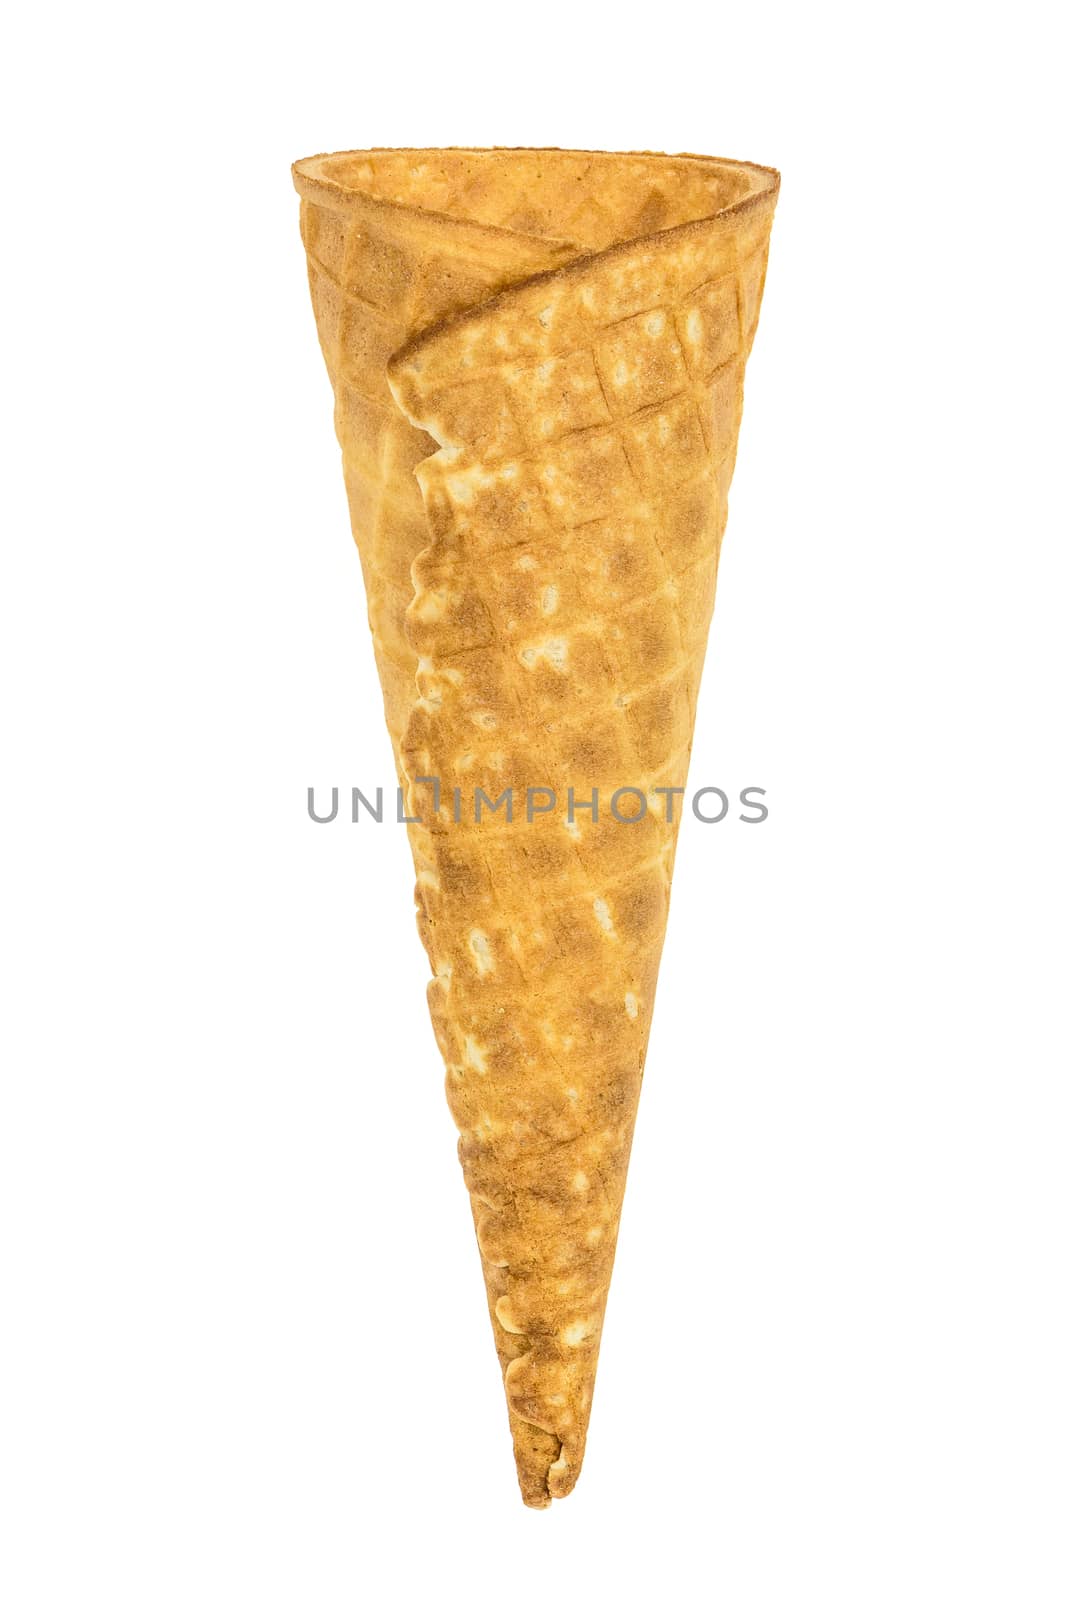 Empty ice cream cone on white background by mkos83